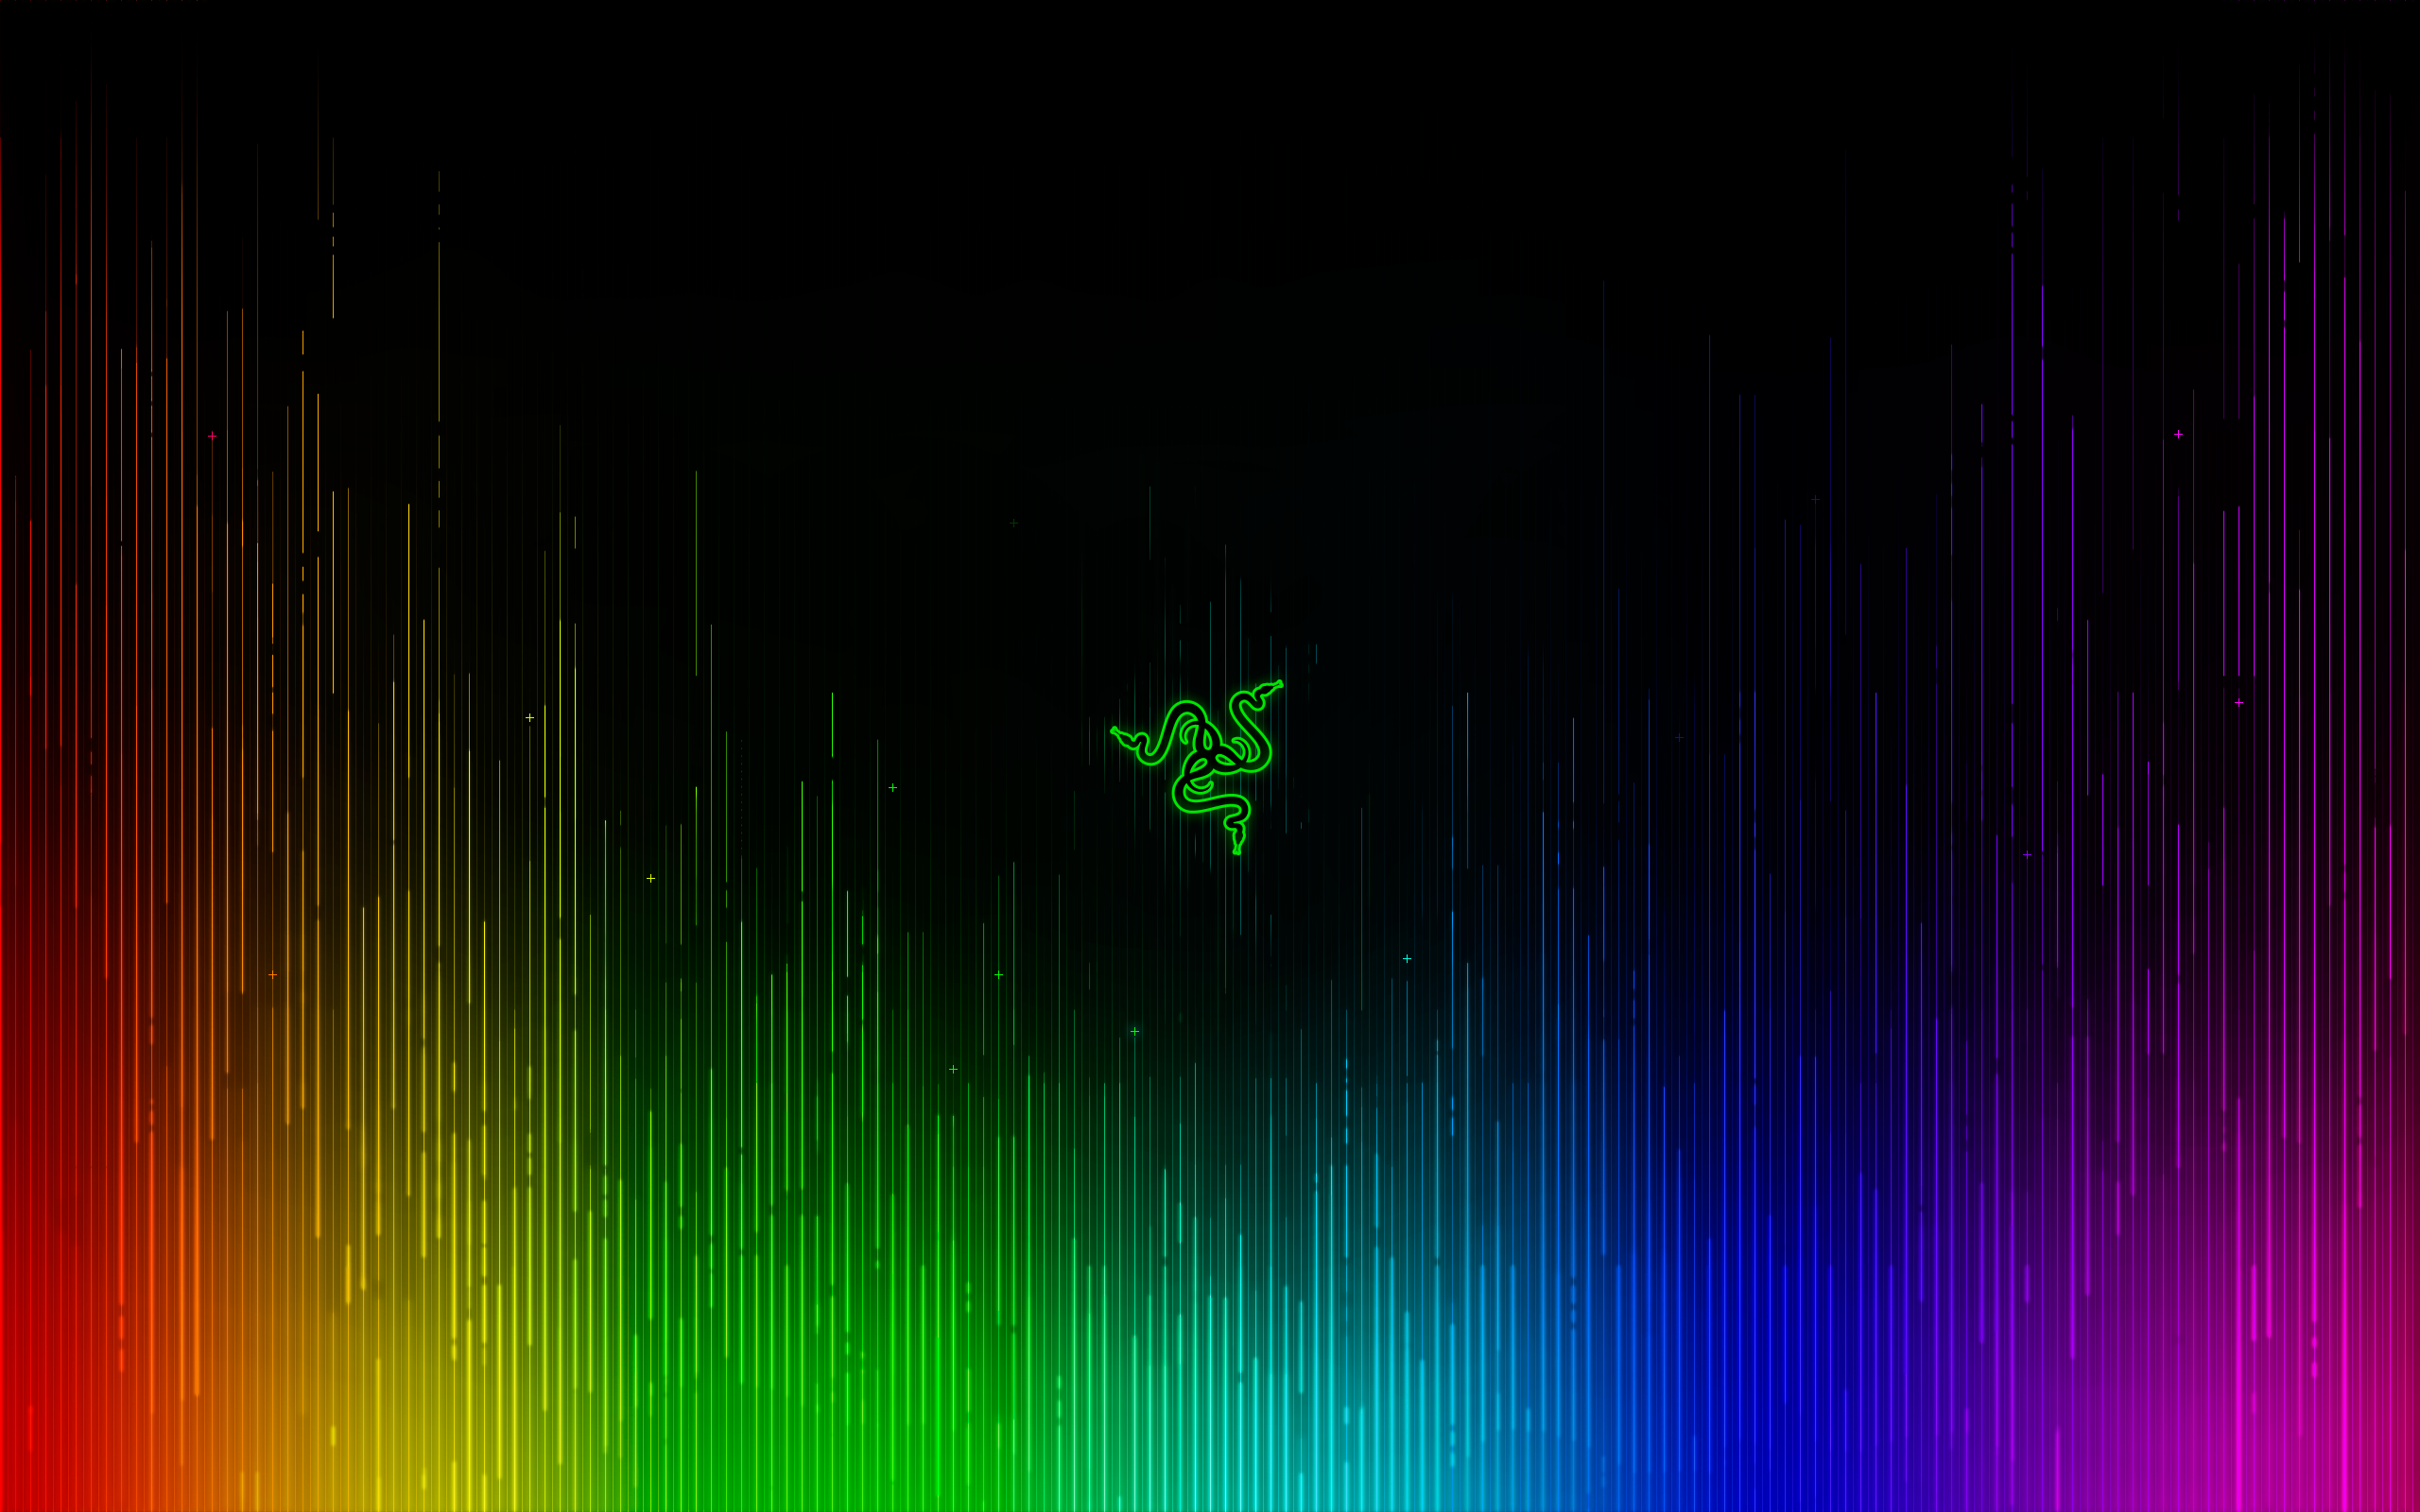 Why isn't there a program for rgb wallpaper?, Apps